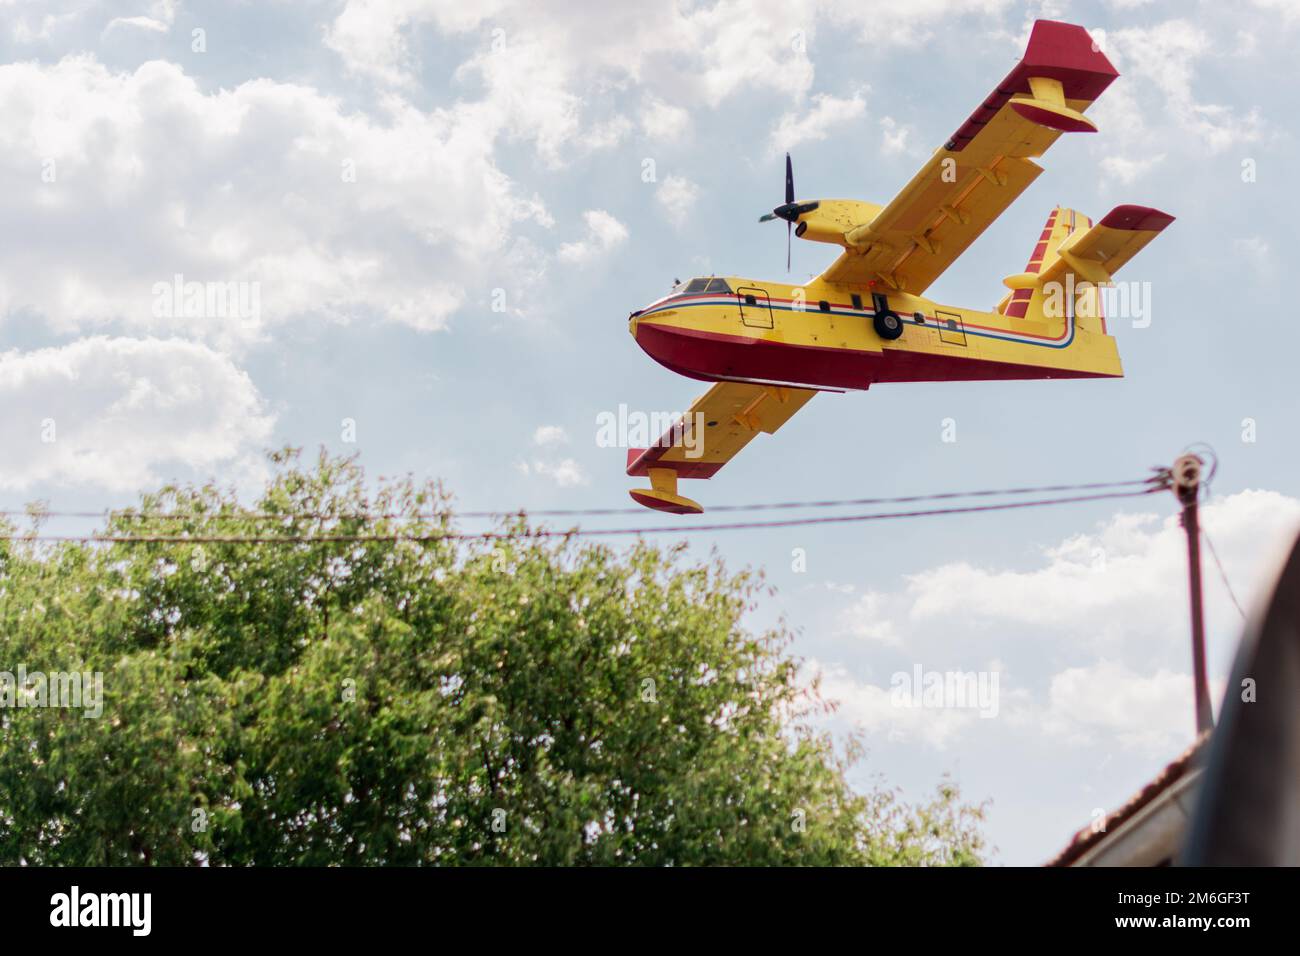 Firefighter airplane flying close to houses in the village Stock Photo